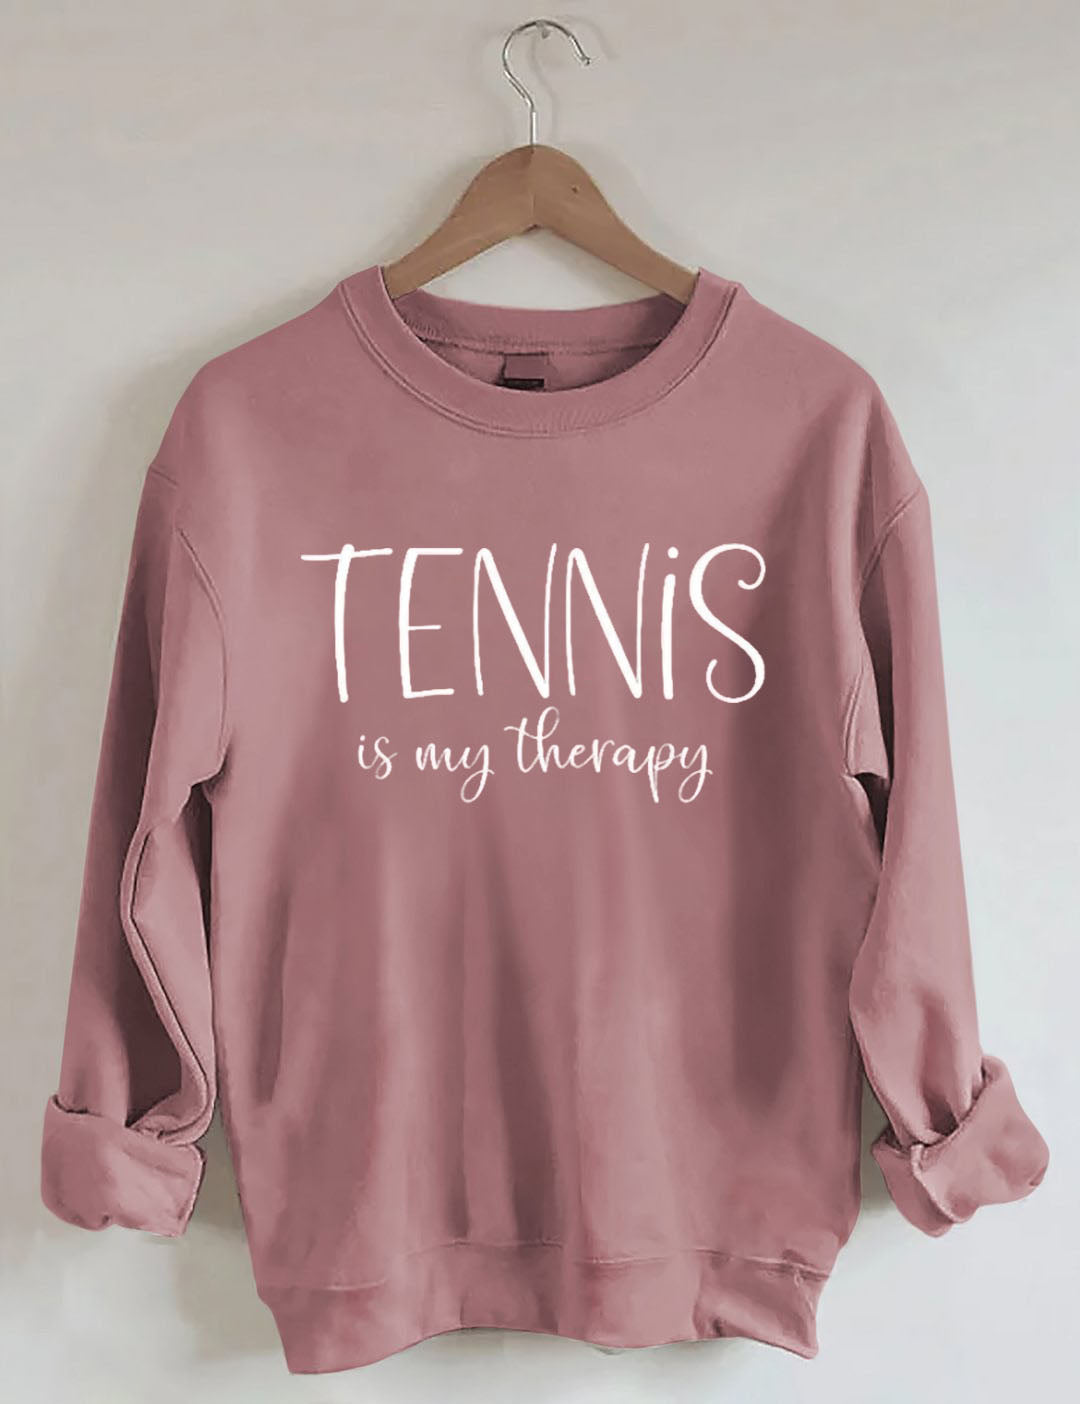 Tennis Is My Therapy Sweatshirt